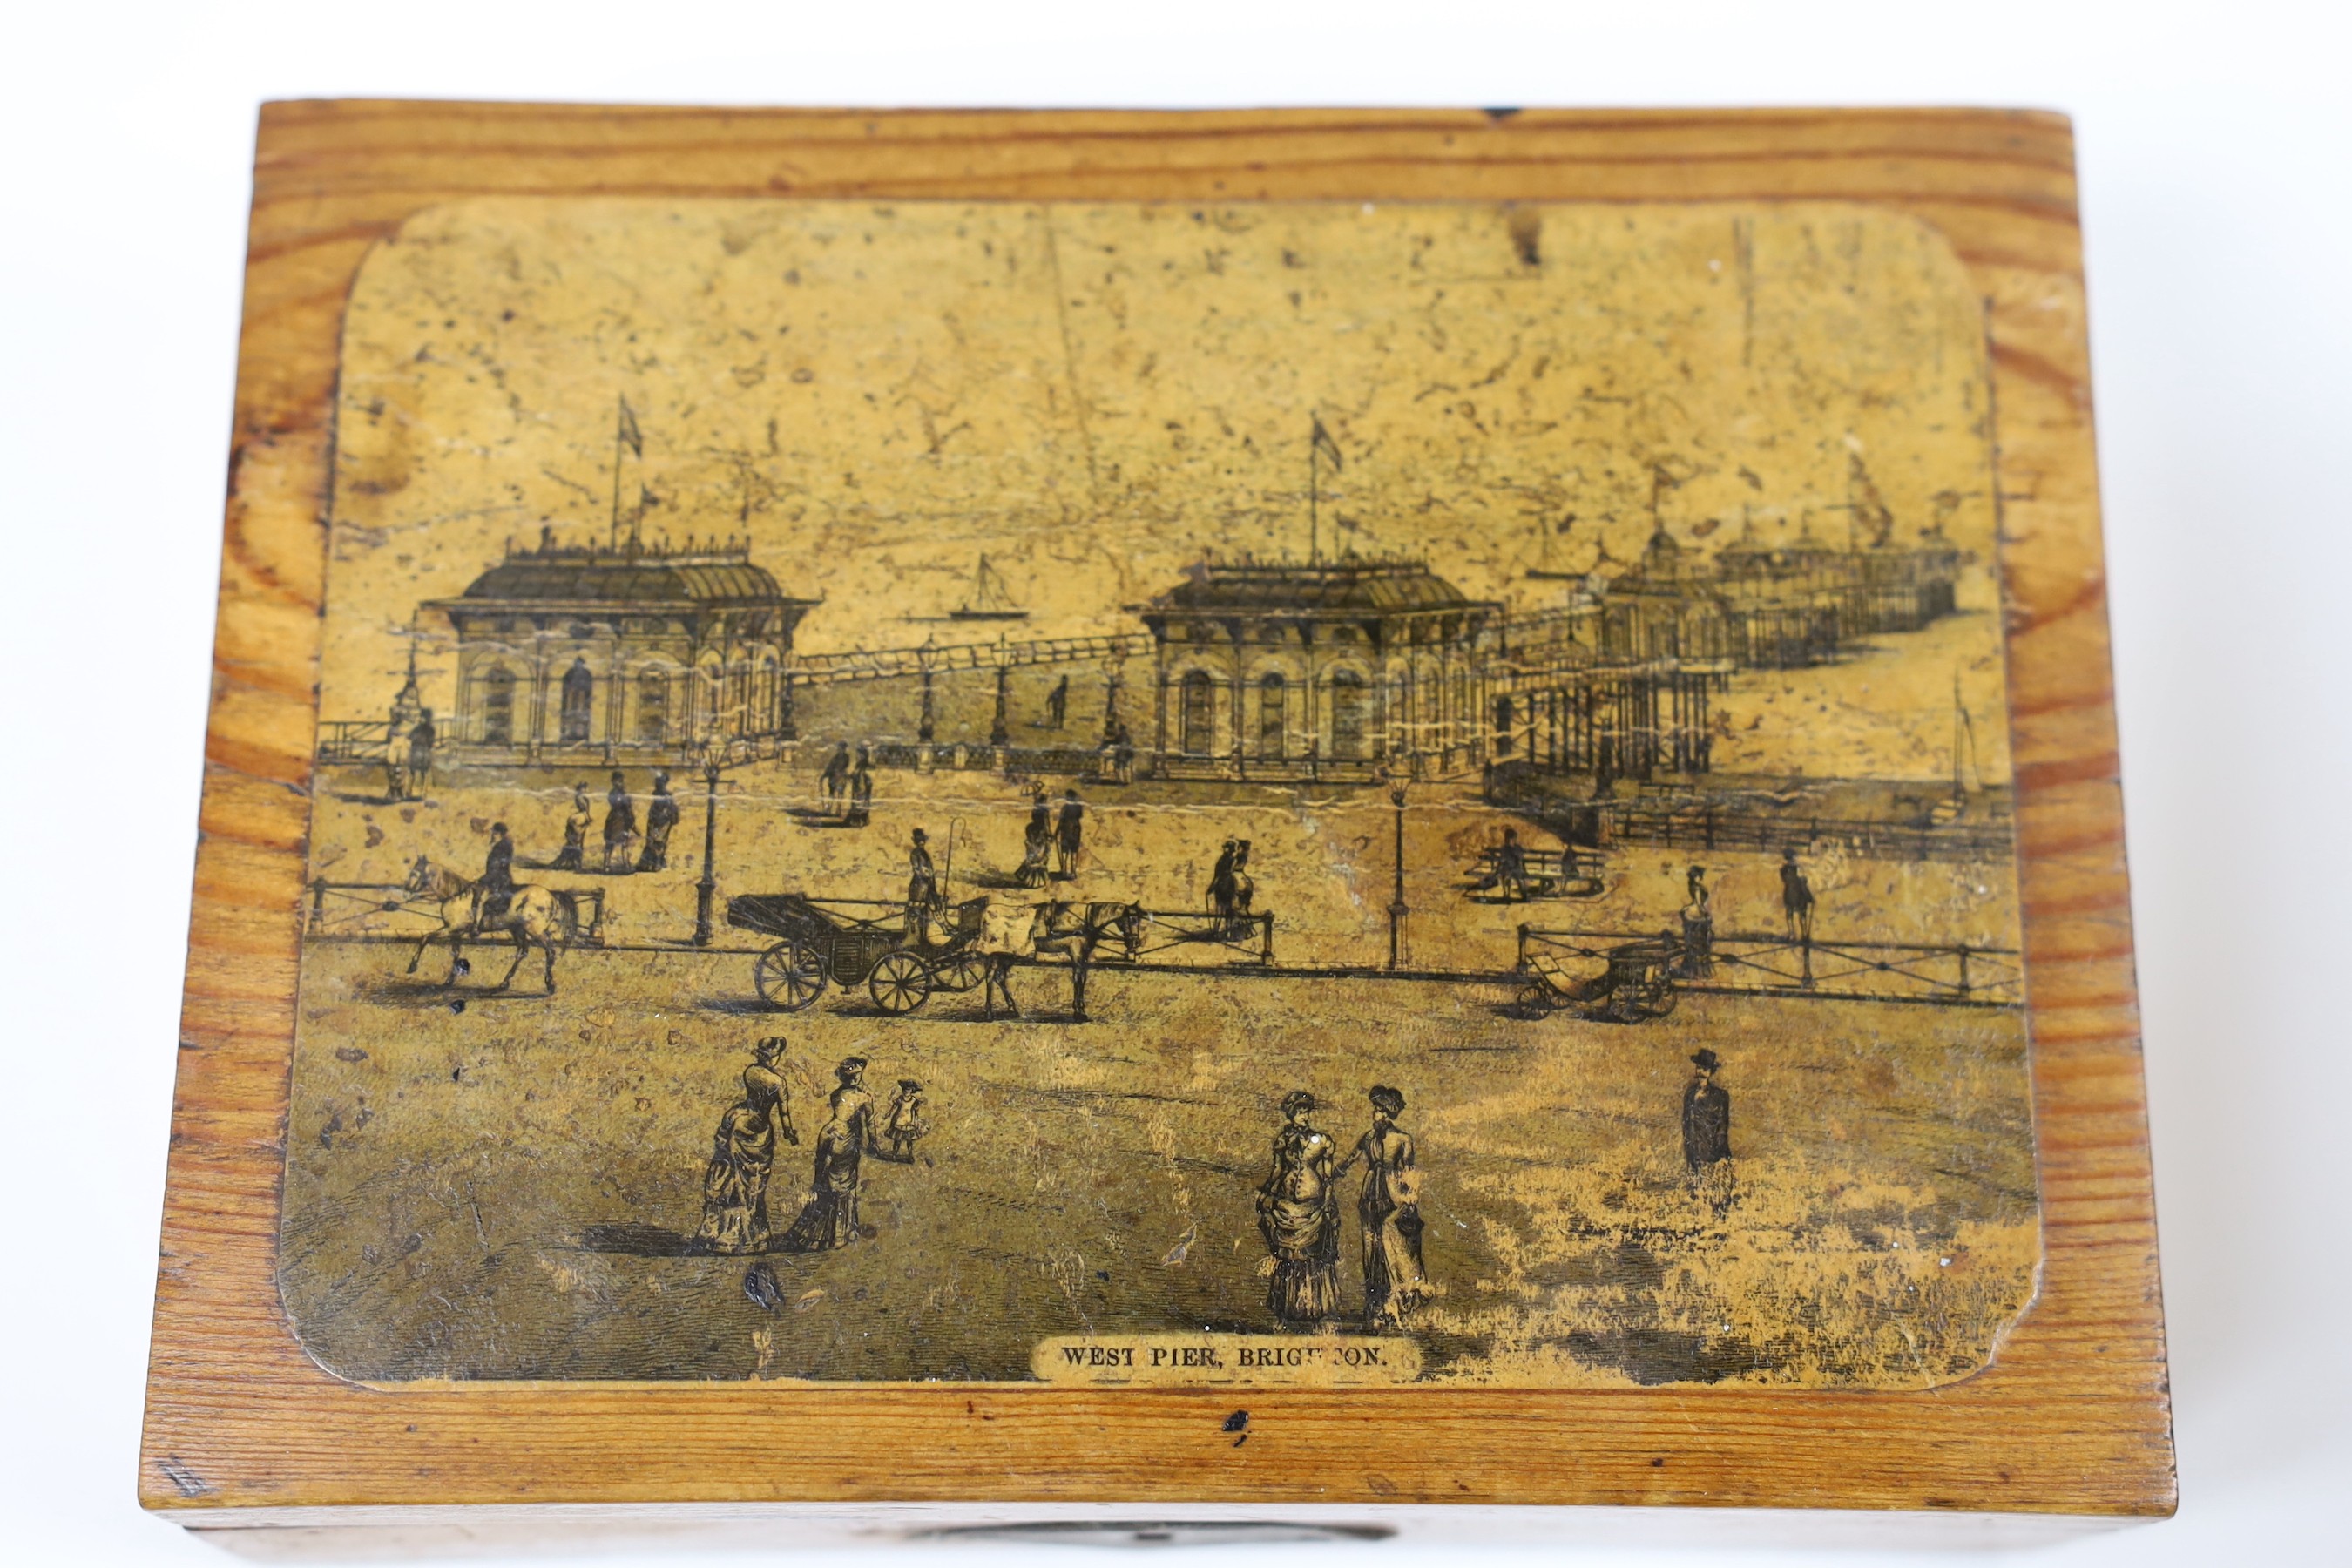 Two early 19th century boxes - Brighton and a smaller similar box